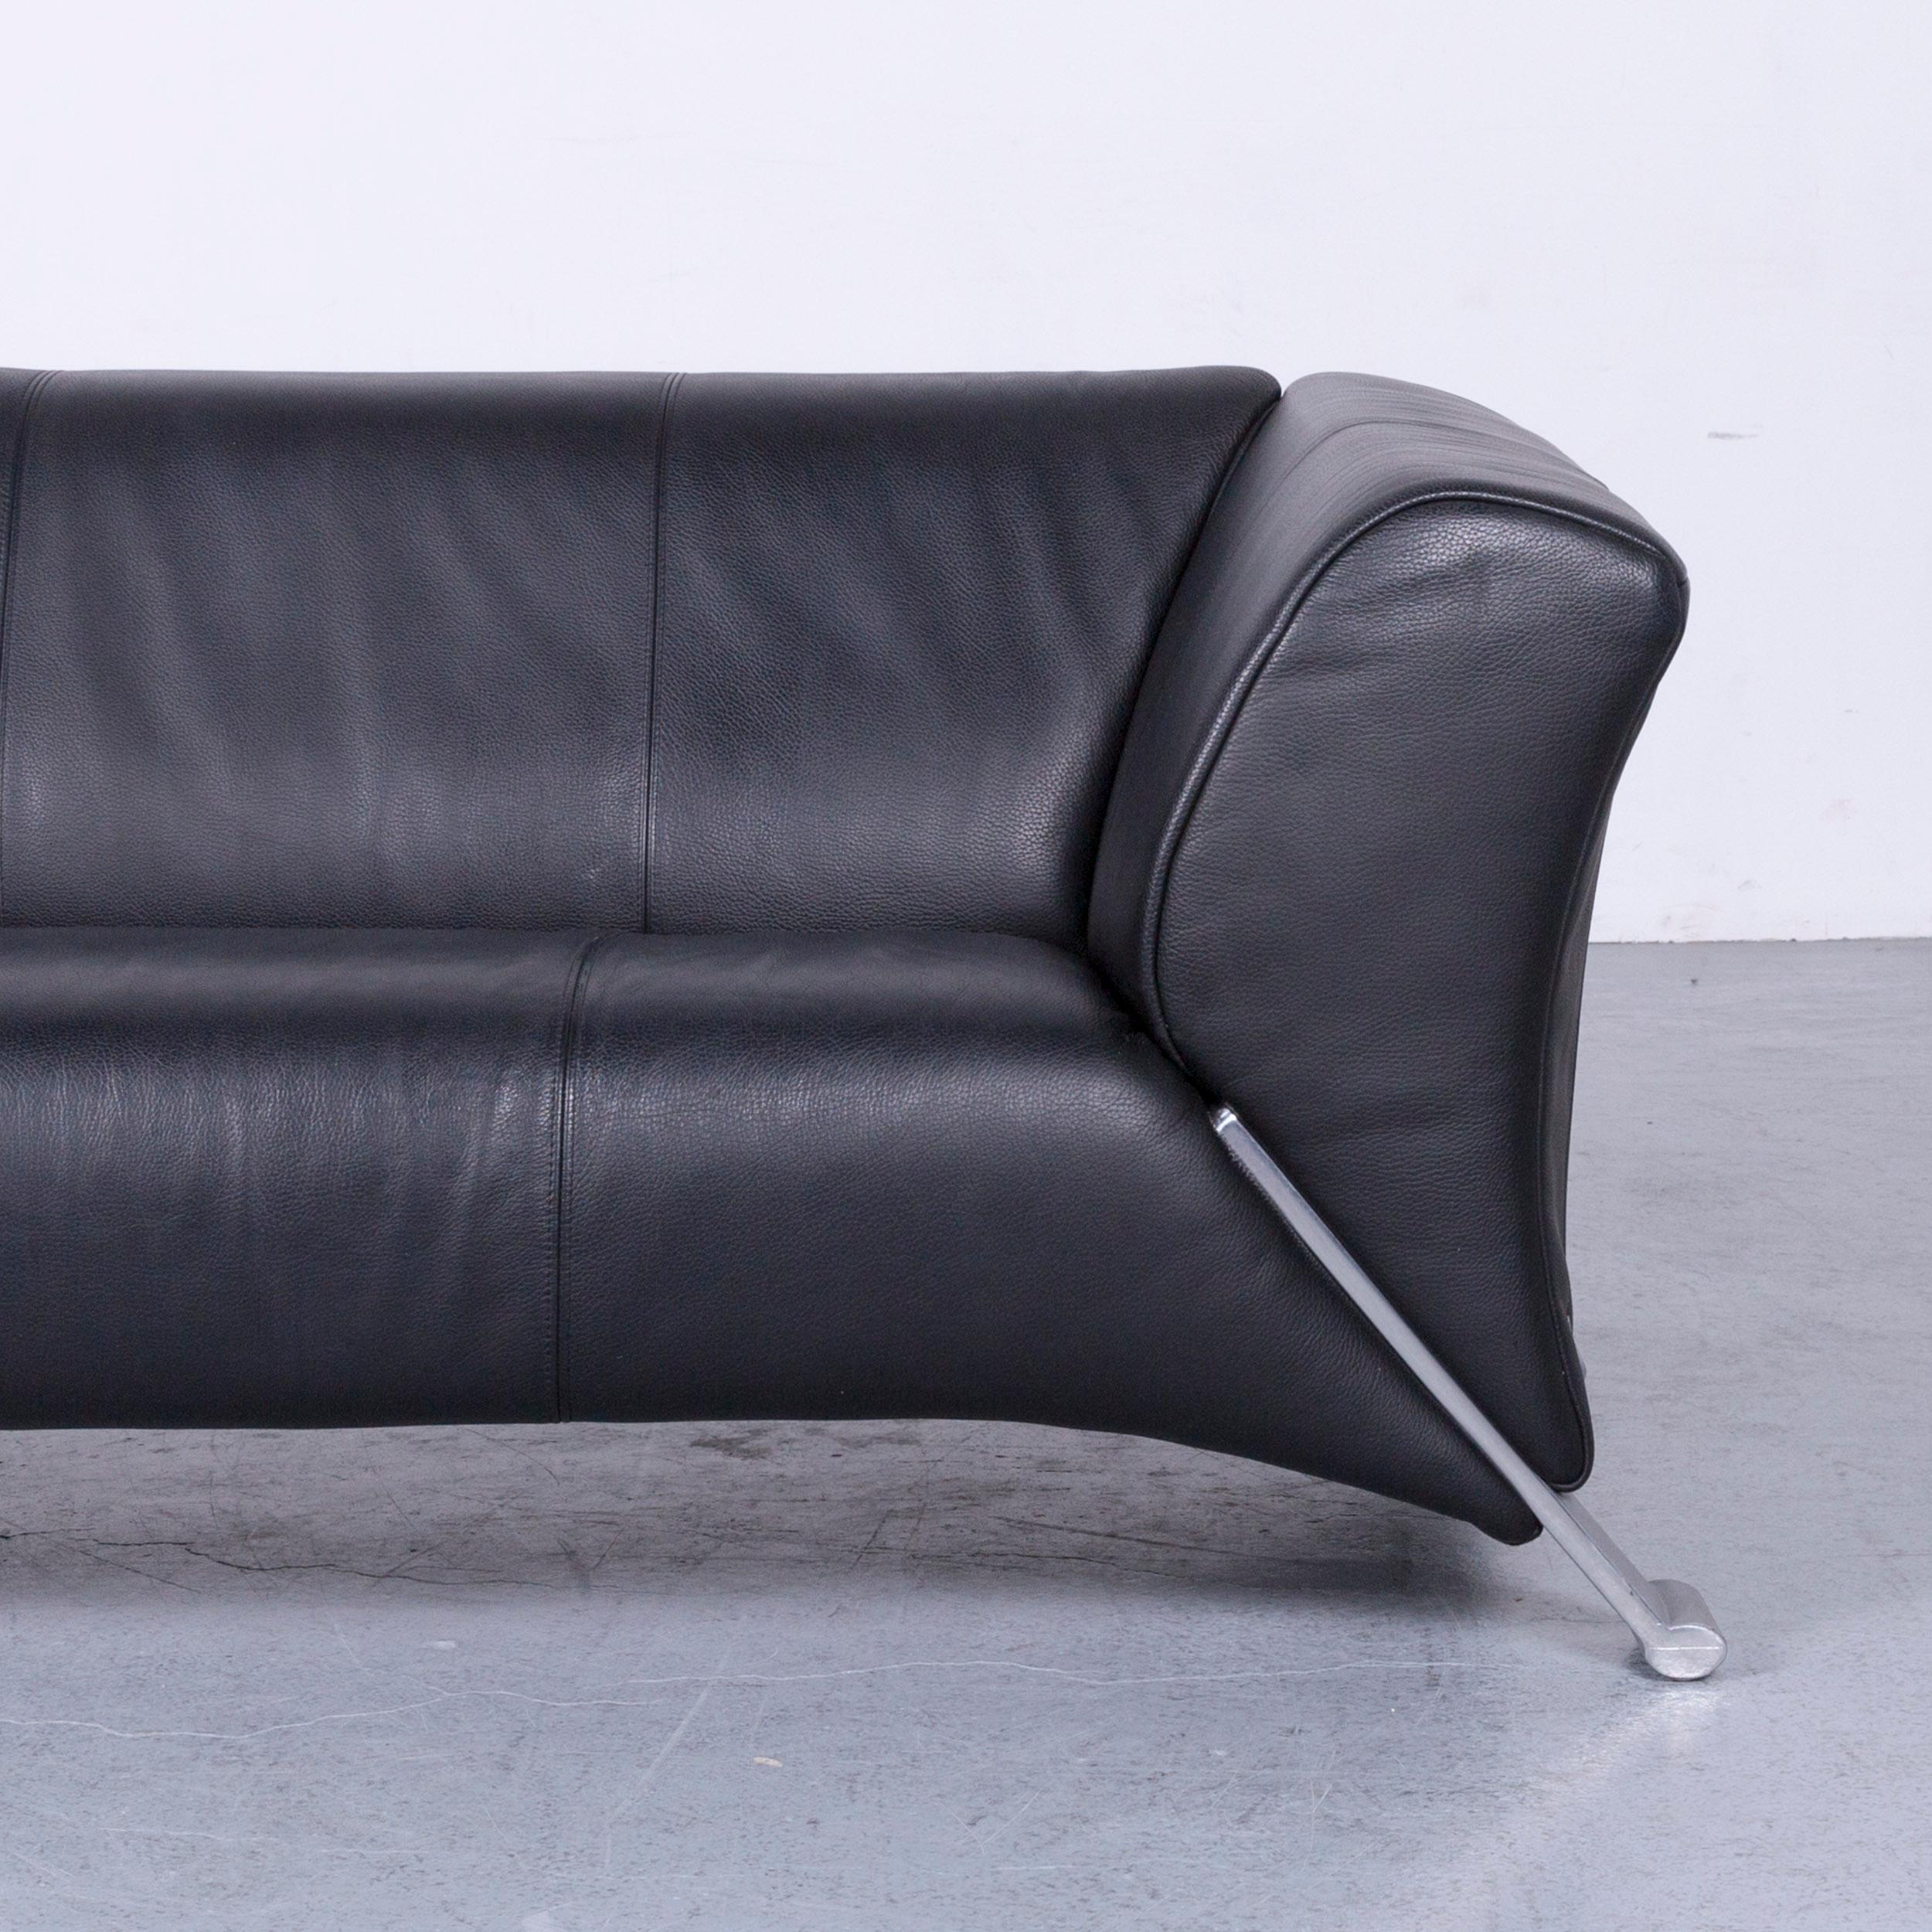 German Rolf Benz 322 Designer Sofa Black Two-Seat Leather Couch